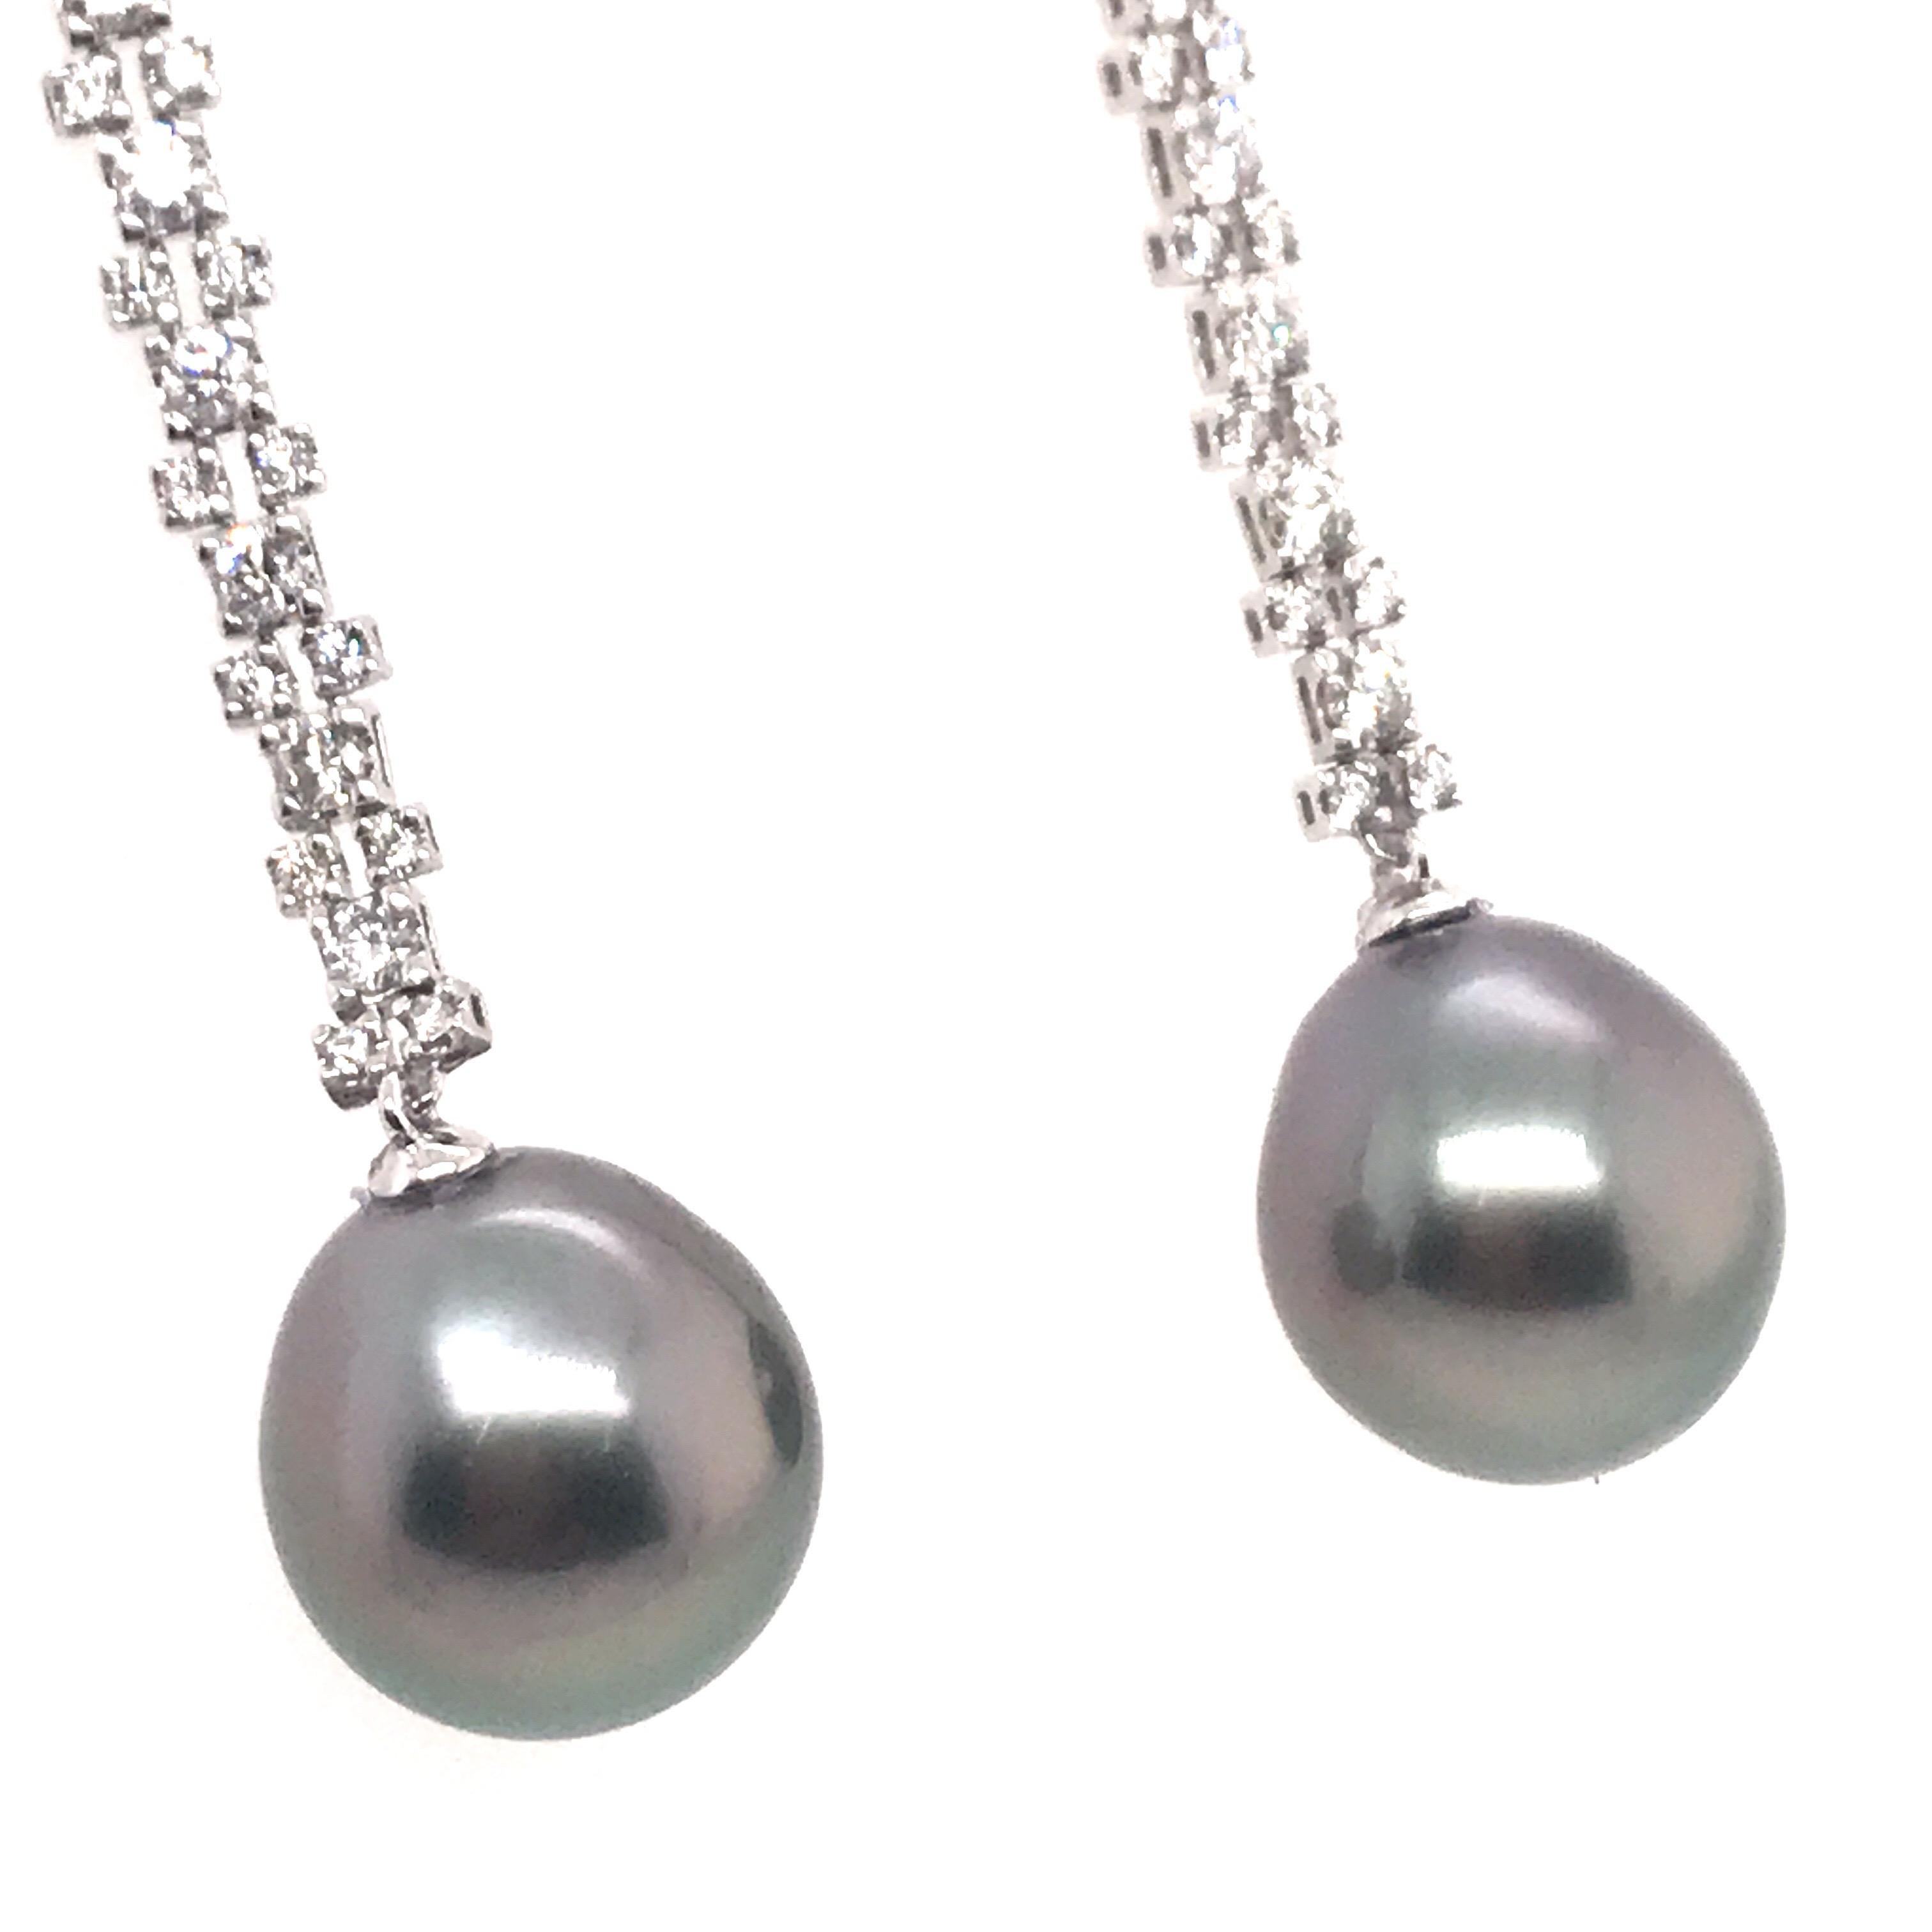 18k White gold drop earrings featuring two Tahitian pearls measuring 12-13 mm and 64 round brilliants weighing 1.08 carats. 
Color G-H
Clarity SI